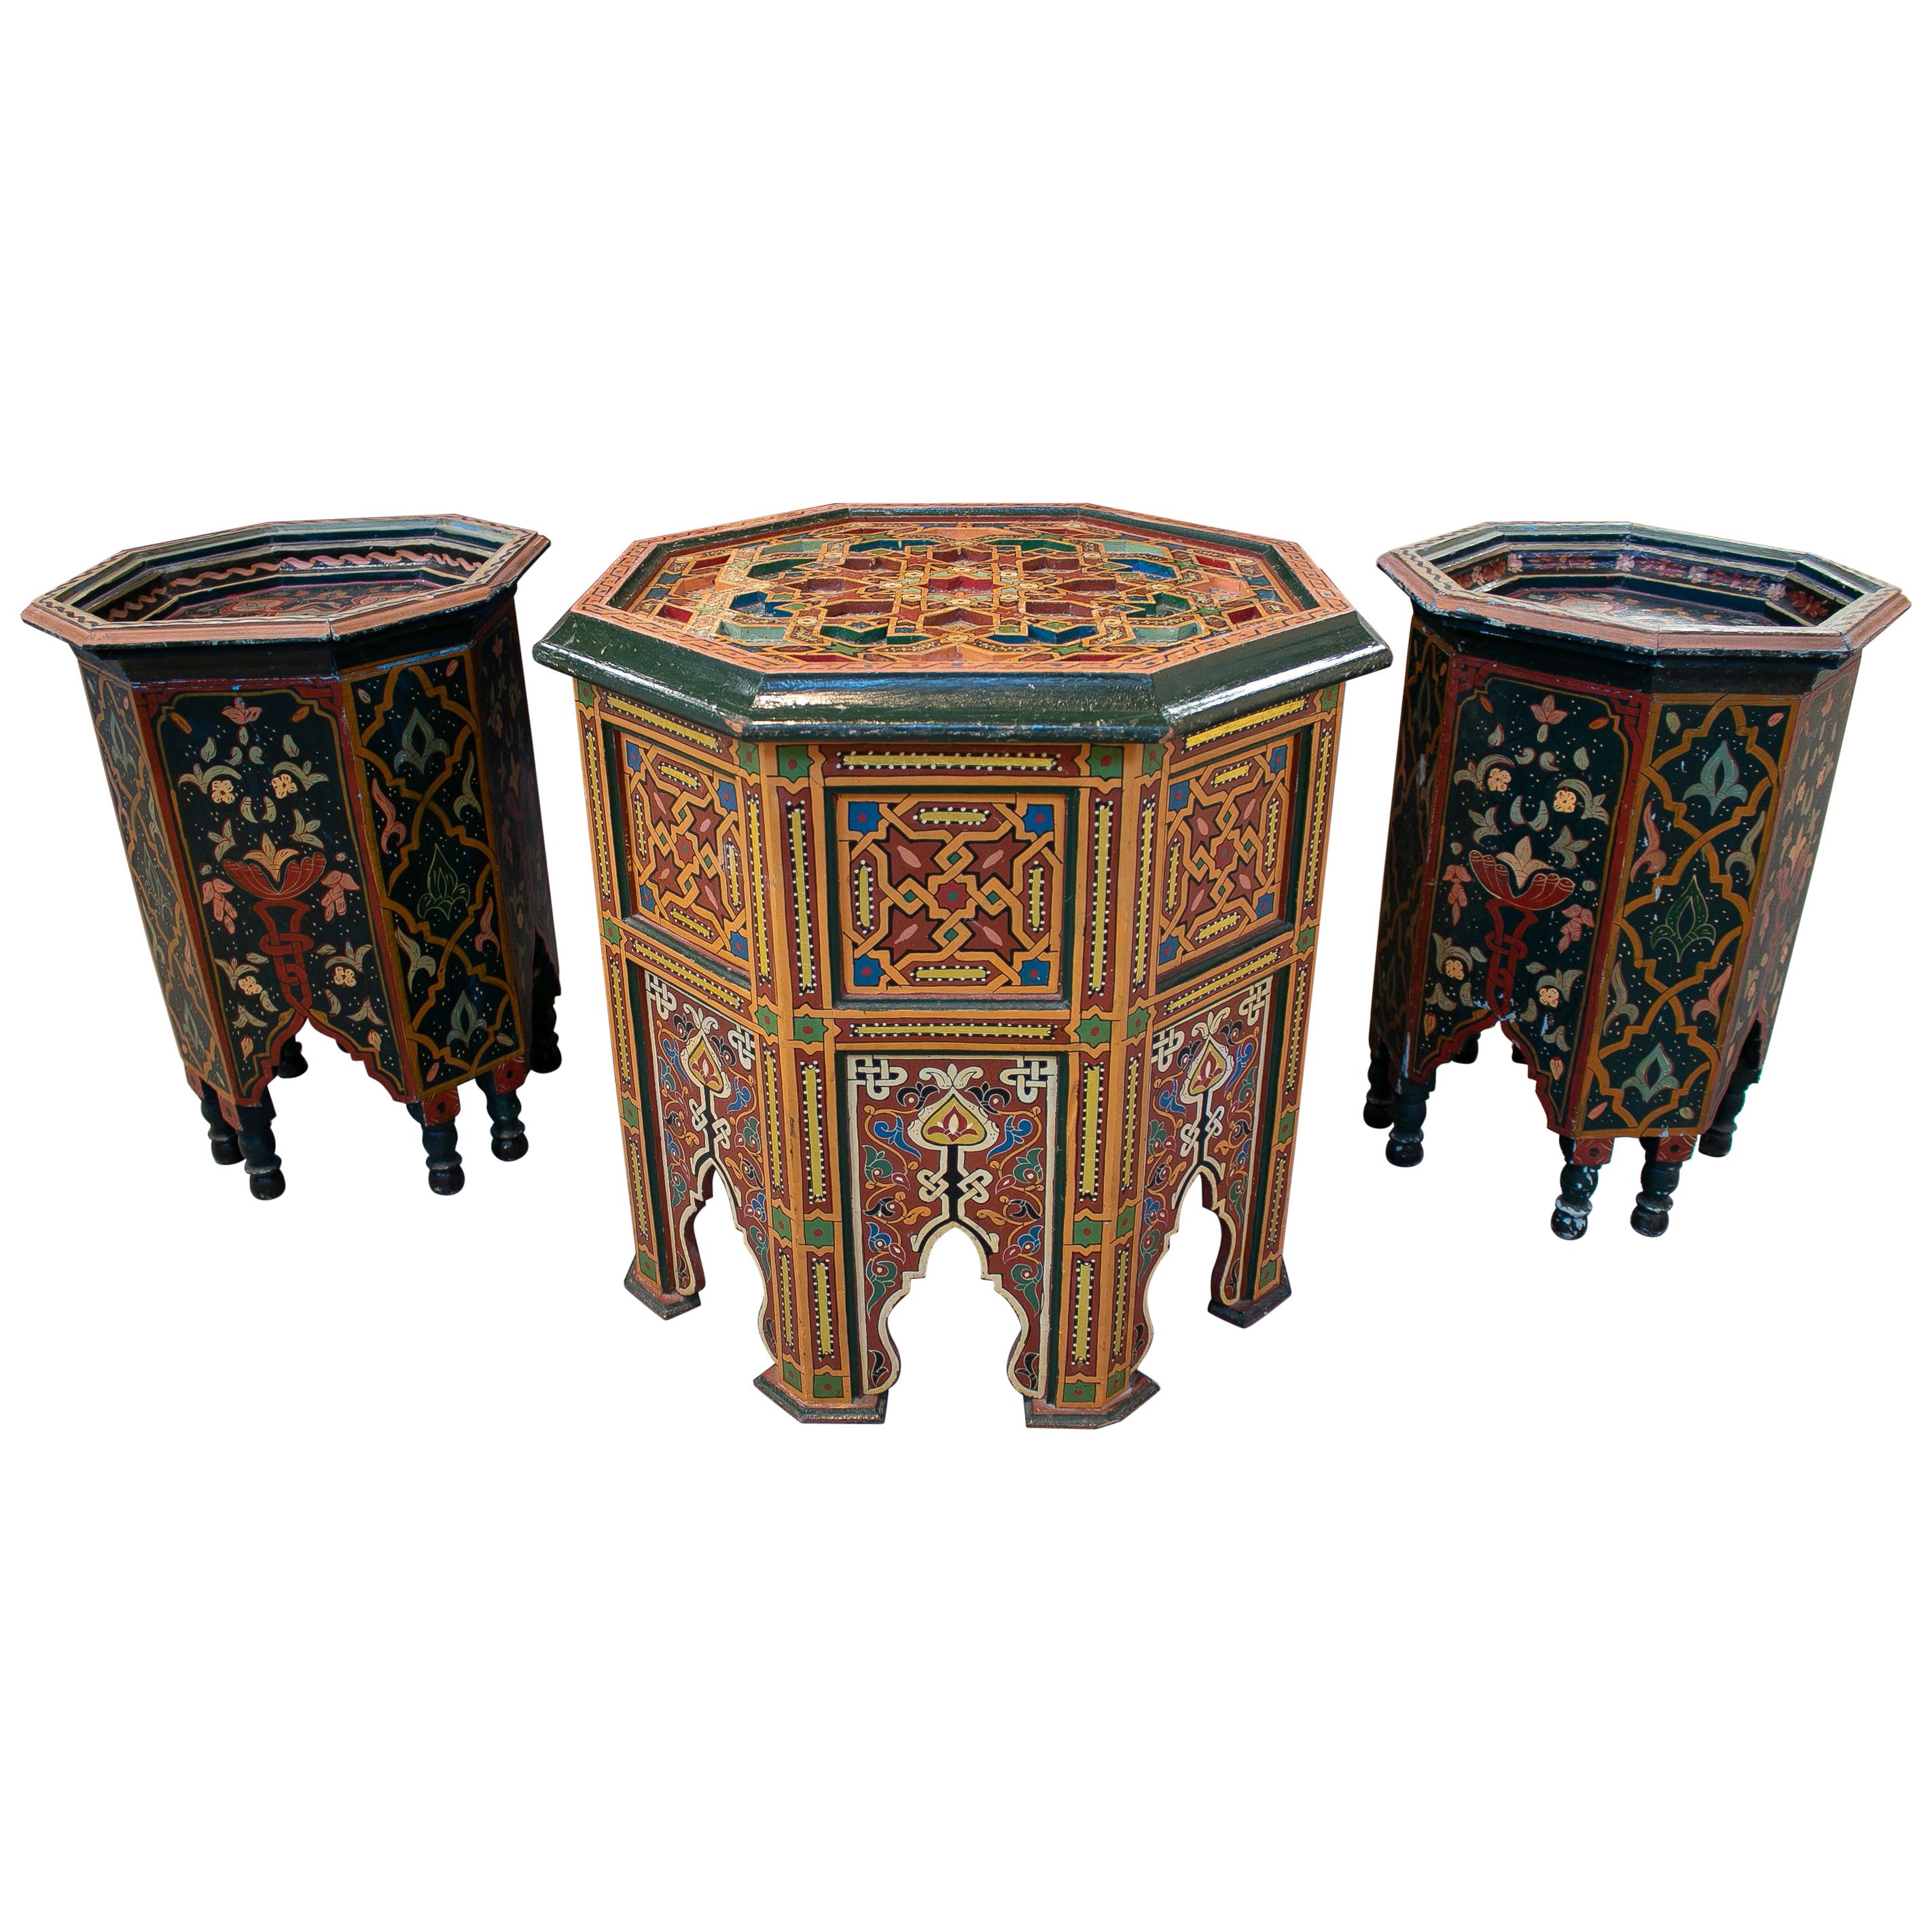 1960s Set of Three Moroccan Octagonal Wooden Painted Side Tables